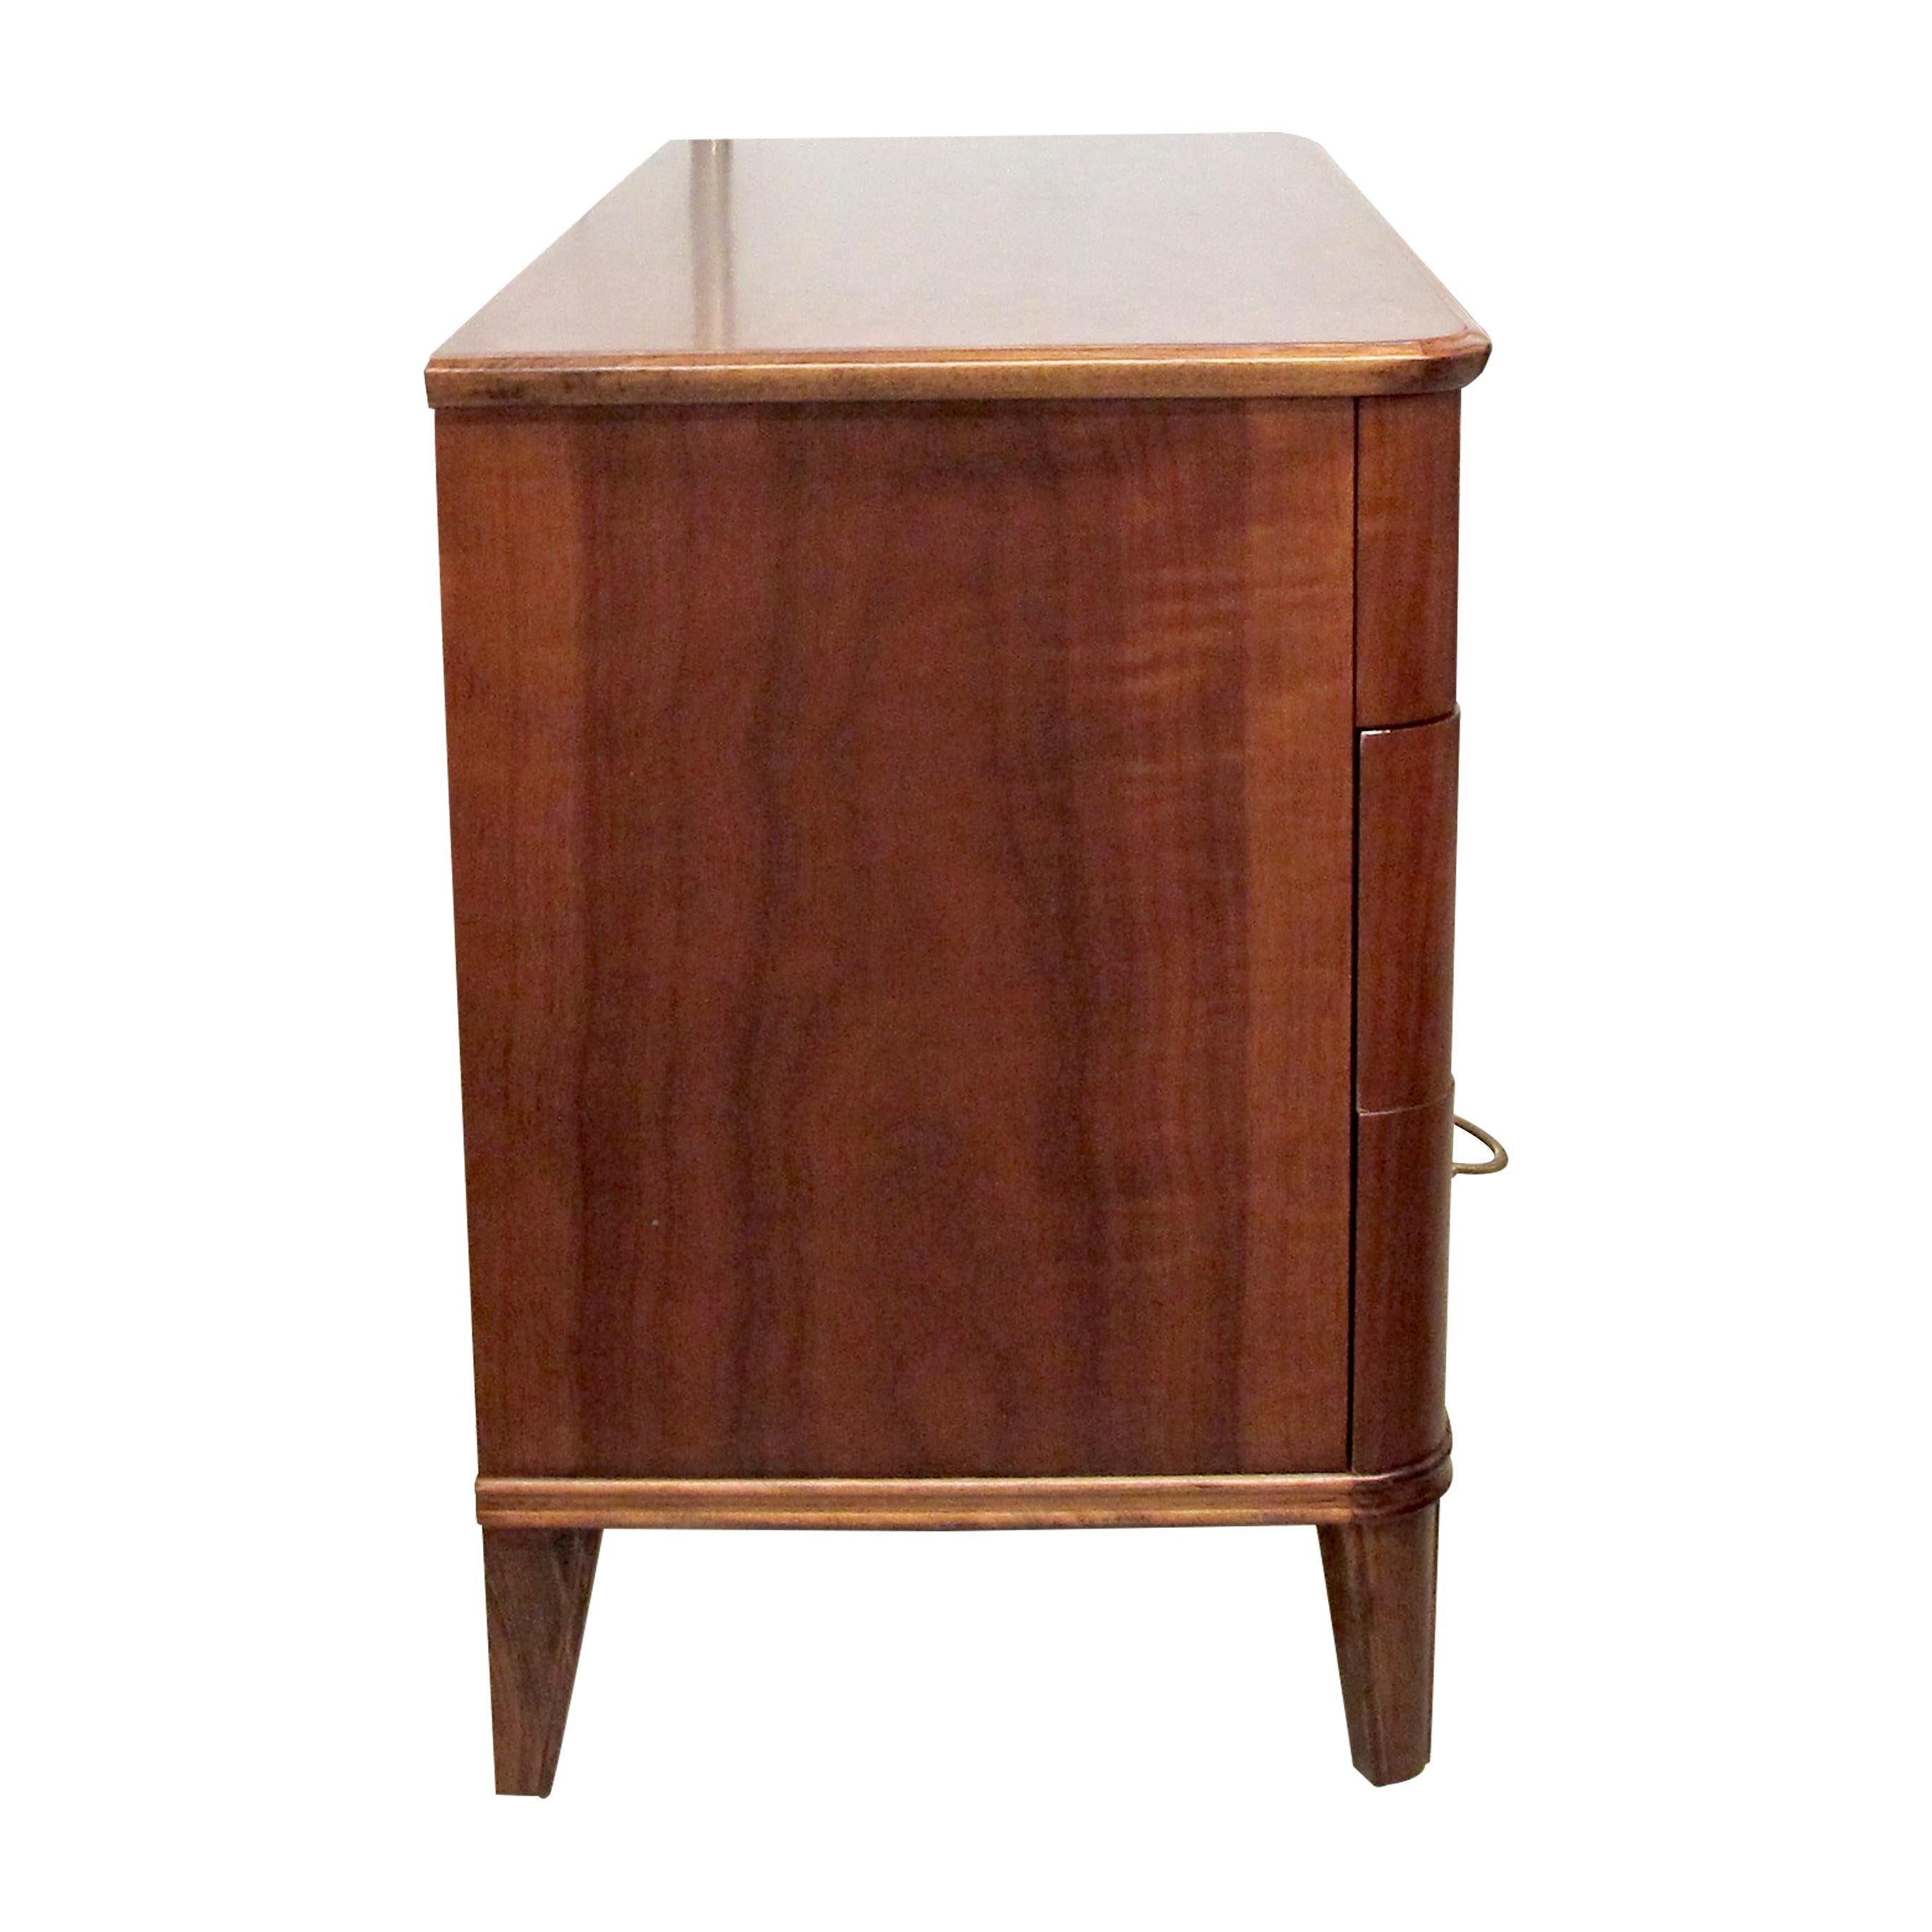 Mid-20th Century 1940s Swedish Chest of Drawers with Walnut Veneers with Curved Edges For Sale